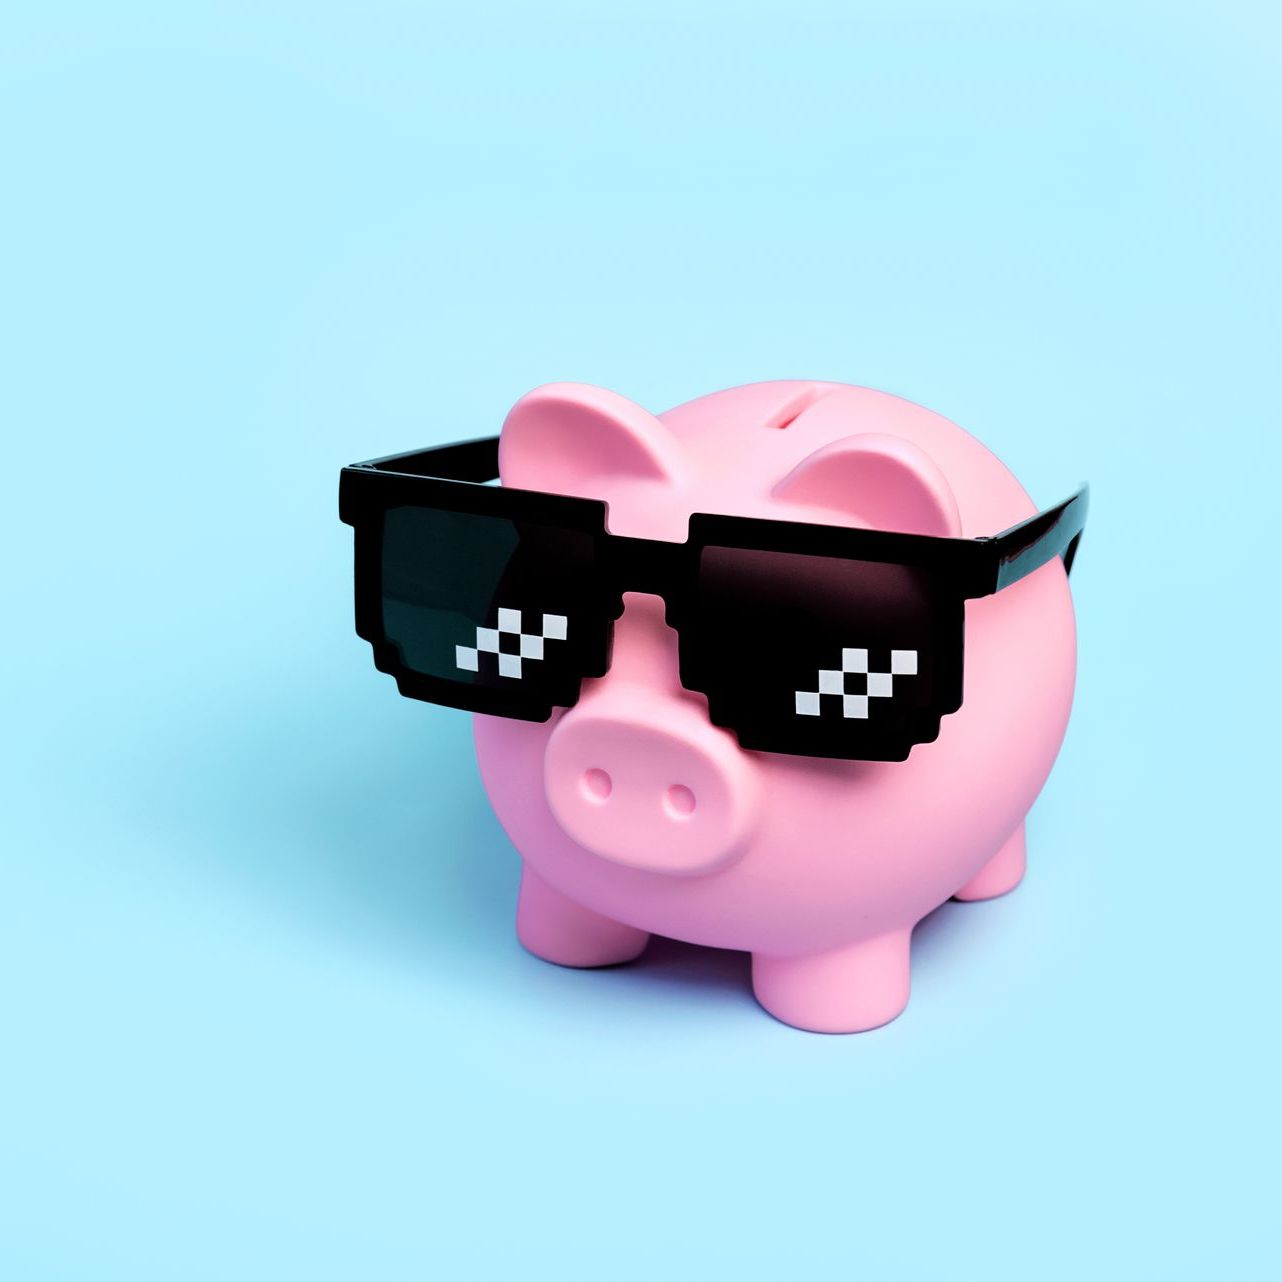 A pink piggy bank wearing sunglasses on a blue background